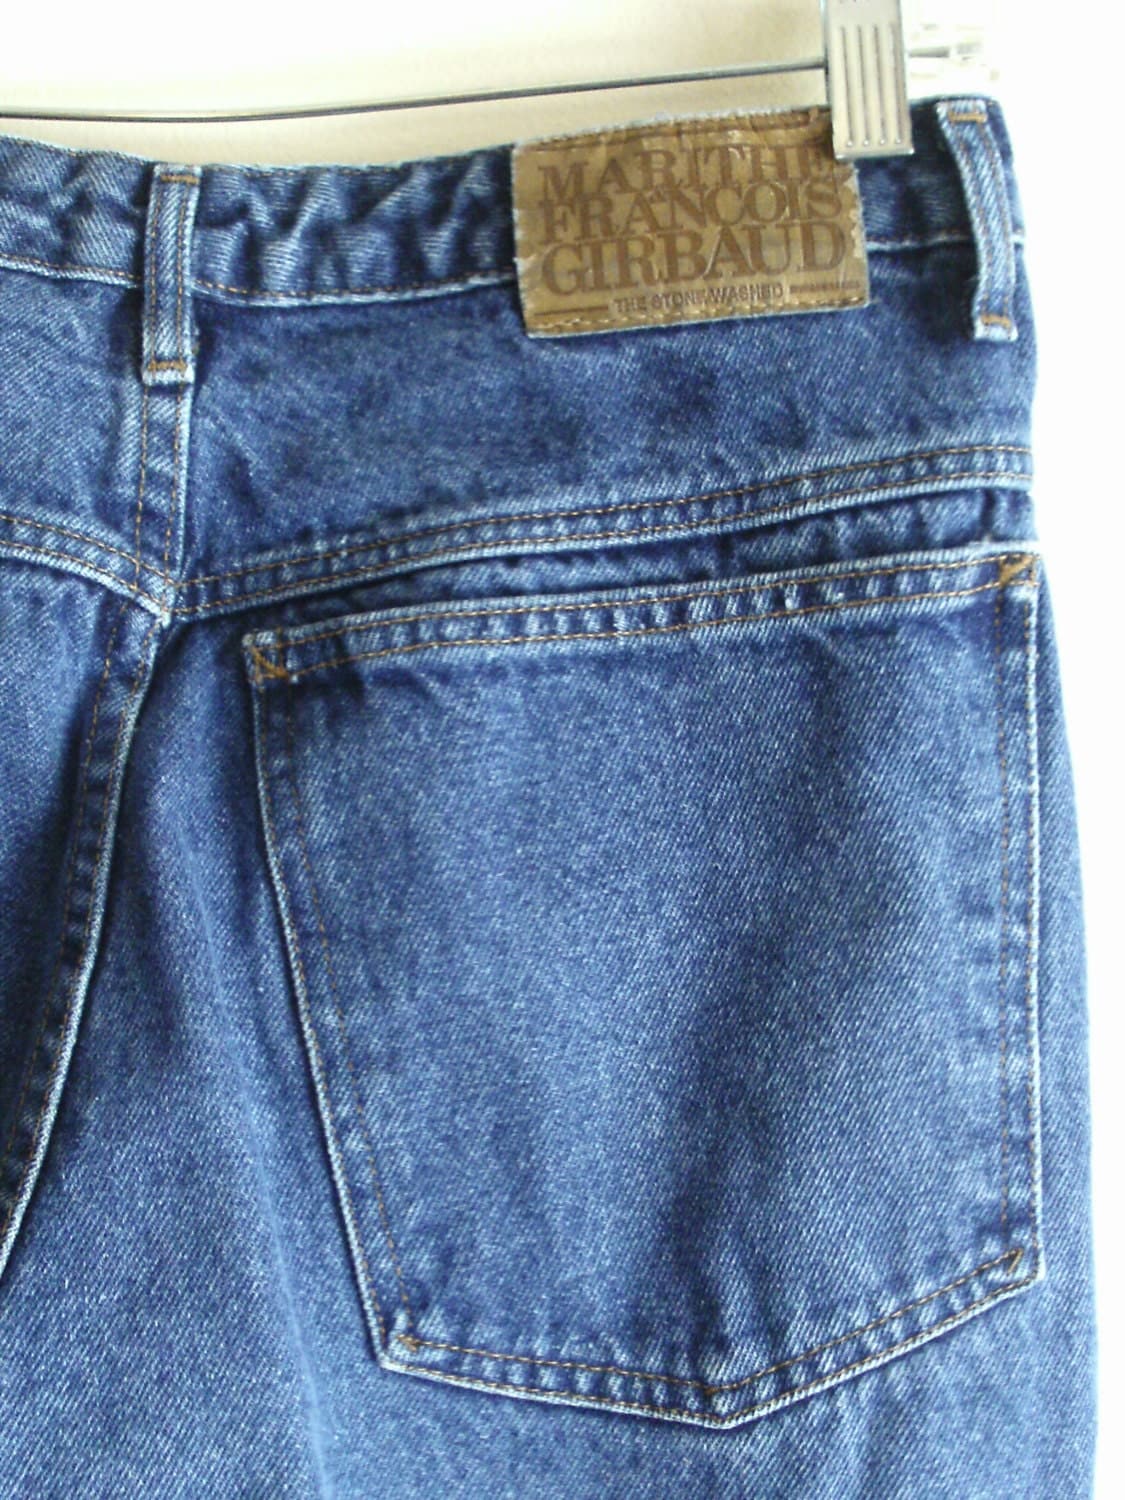 Vintage High Waisted Tapered Leg Blue Jeans Girbaud Jeans